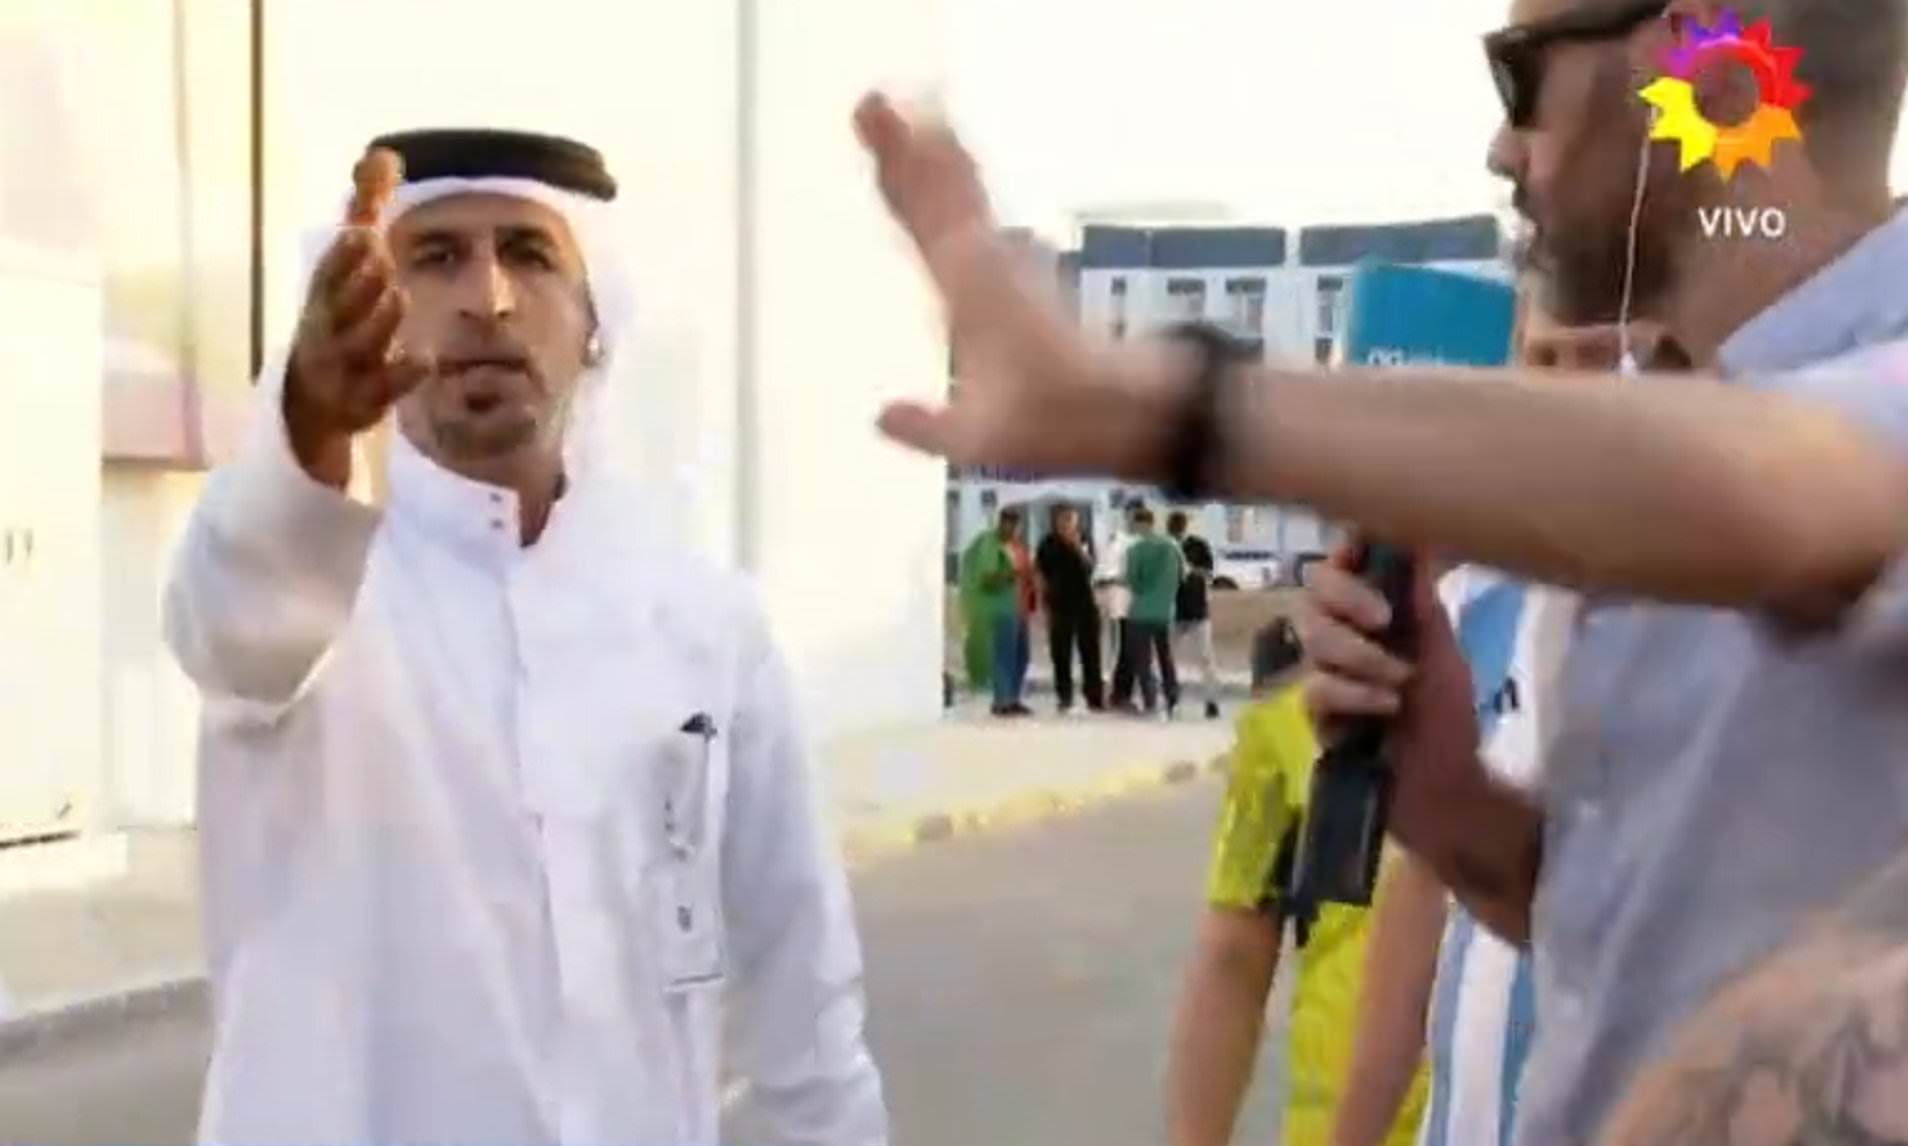 Qatar World Cup officials interrupt live broadcast and order TV crew to leave